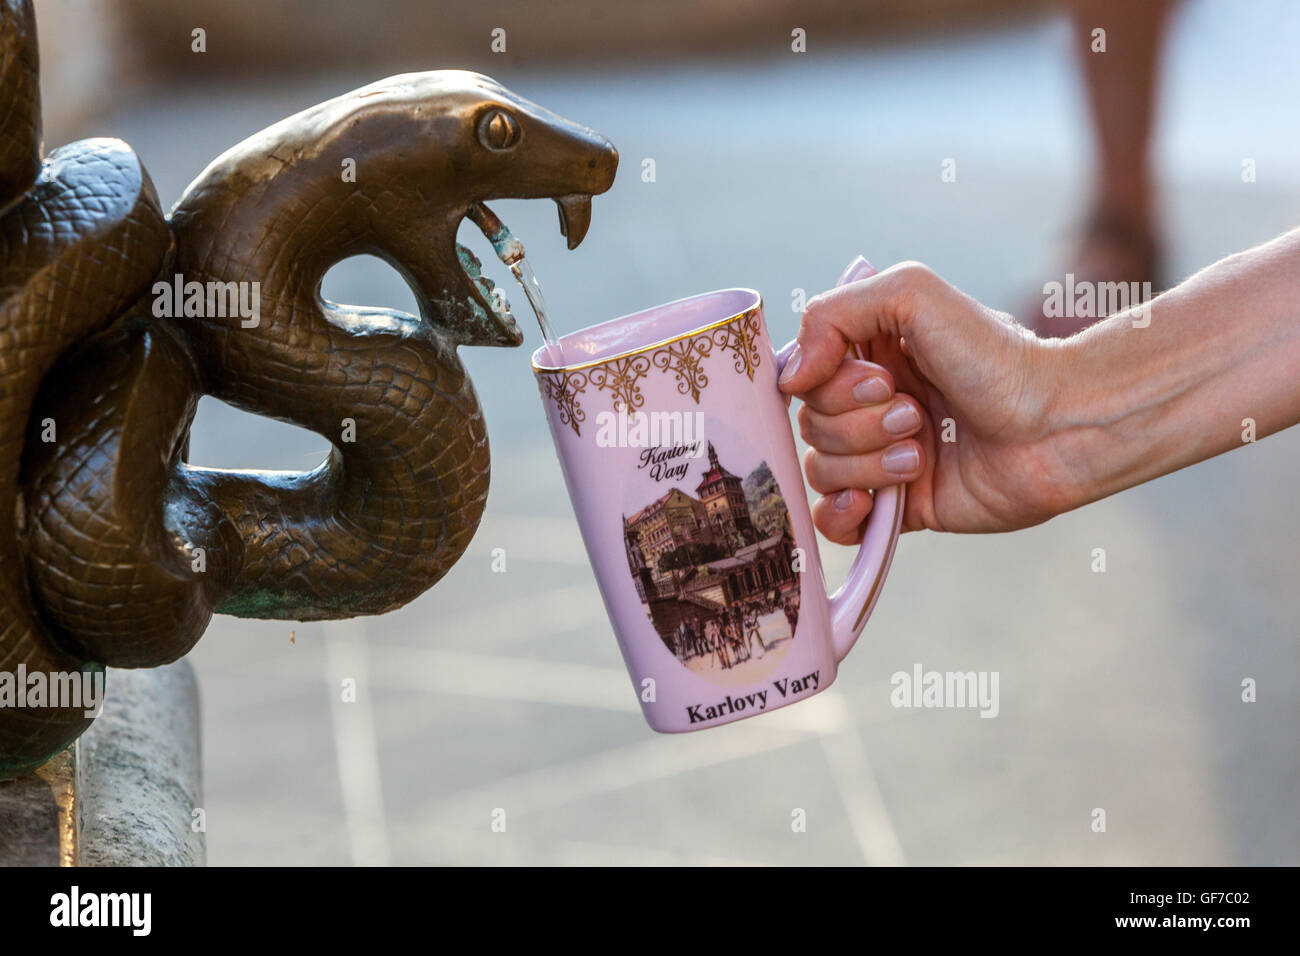 Drinking cup at Snake Spring, Mineral spring water, Karlovy Vary spa colonnade Bohemia Czech Republic Wells Stock Photo